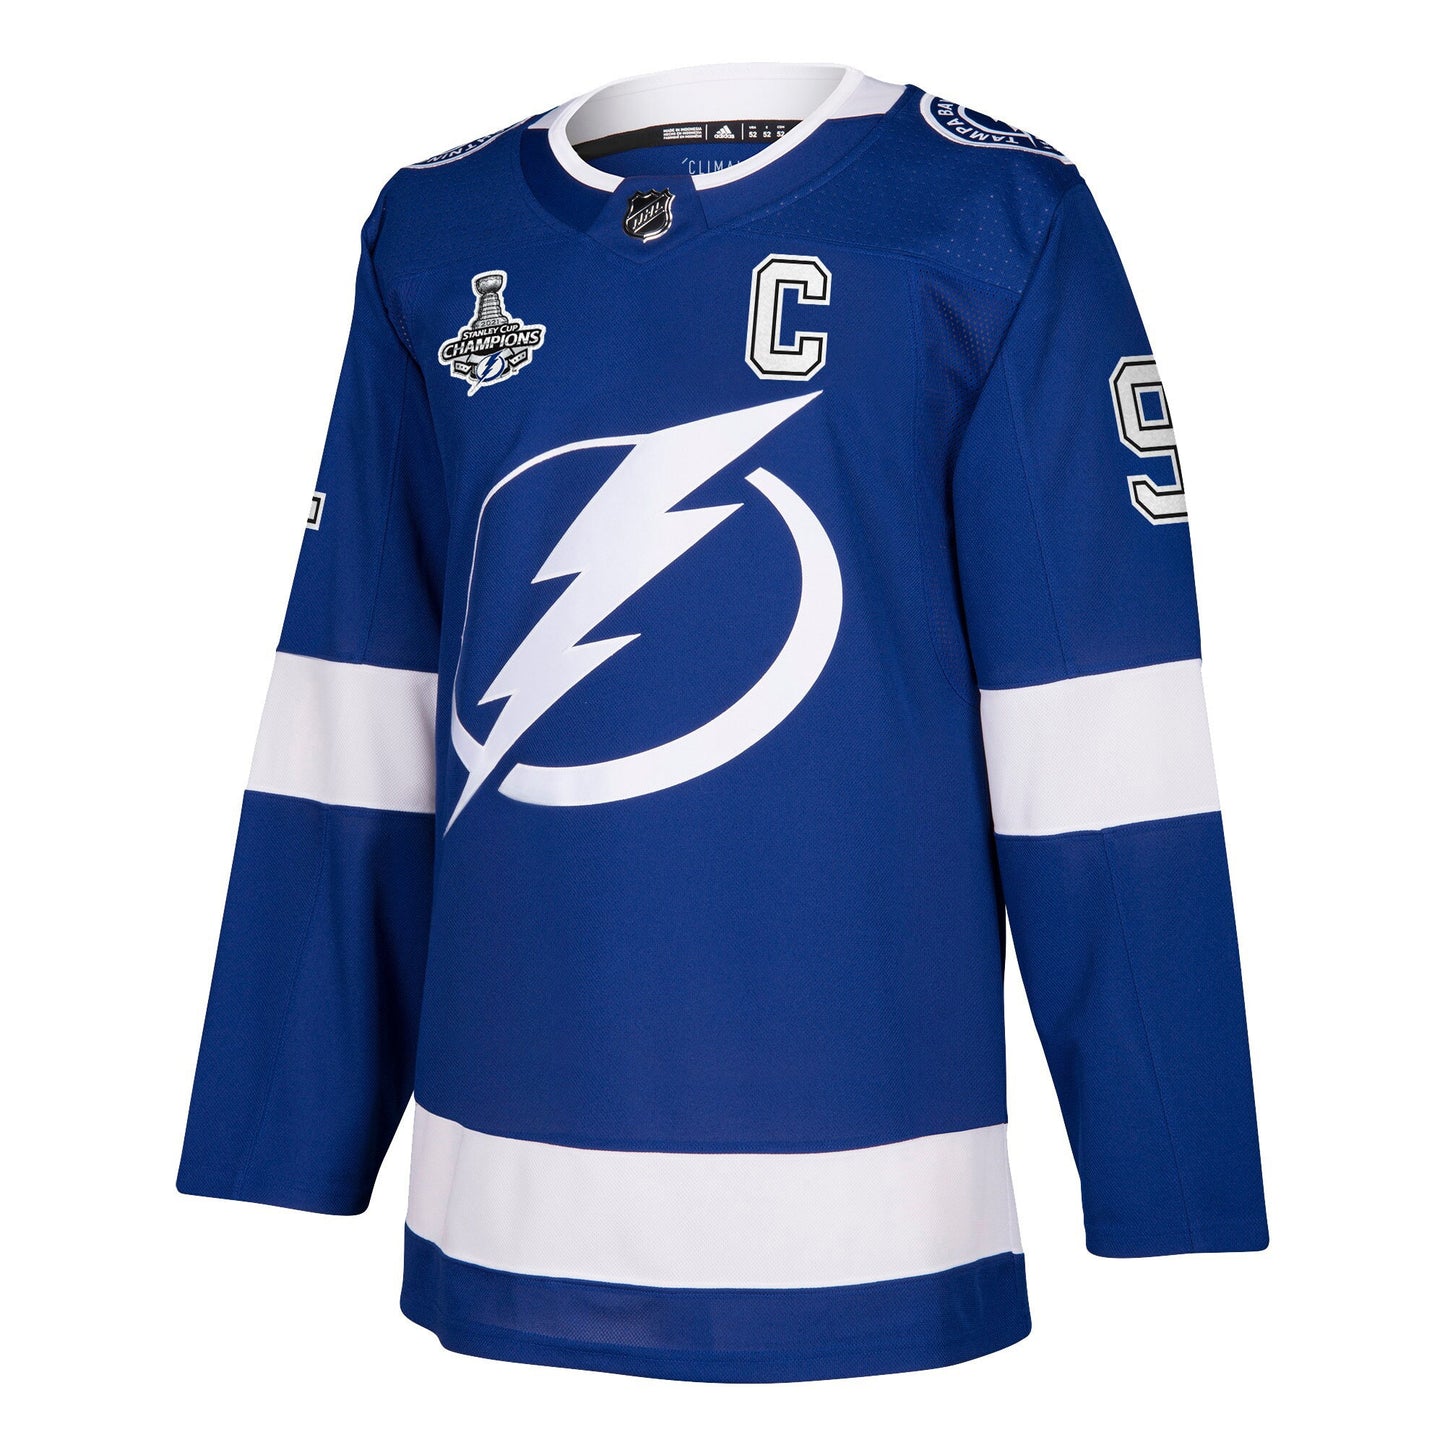 Steven Stamkos Tampa Bay Lightning adidas 2021 Stanley Cup Champions Authentic Player Jersey - Blue